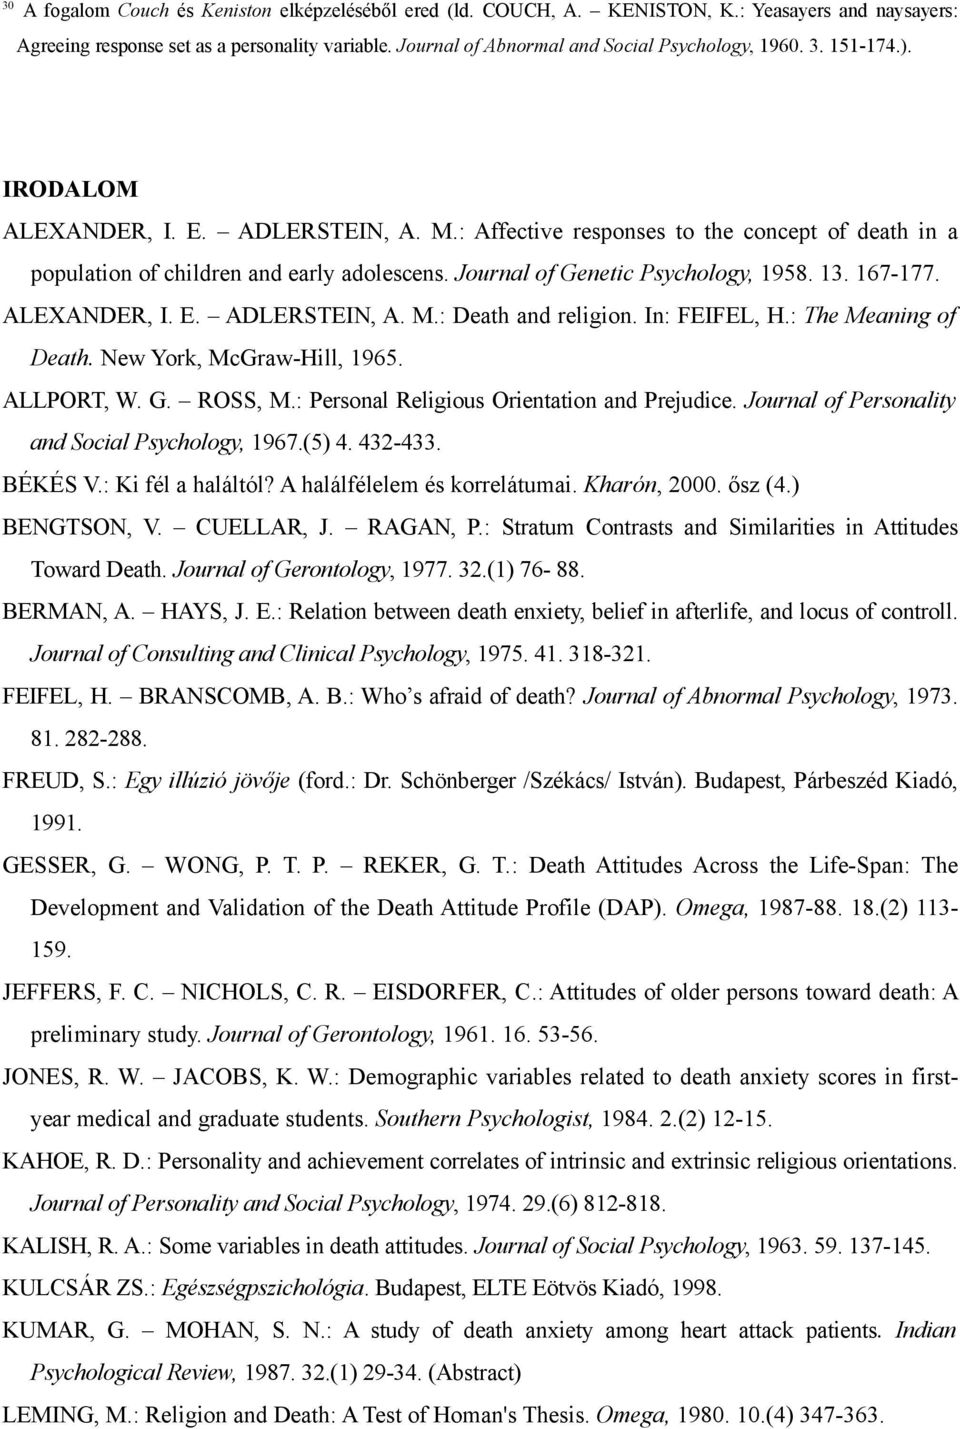 : Affective responses to the concept of death in a population of children and early adolescens. Journal of Genetic Psychology, 1958. 13. 167-177. ALEXANDER, I. E. ADLERSTEIN, A. M.